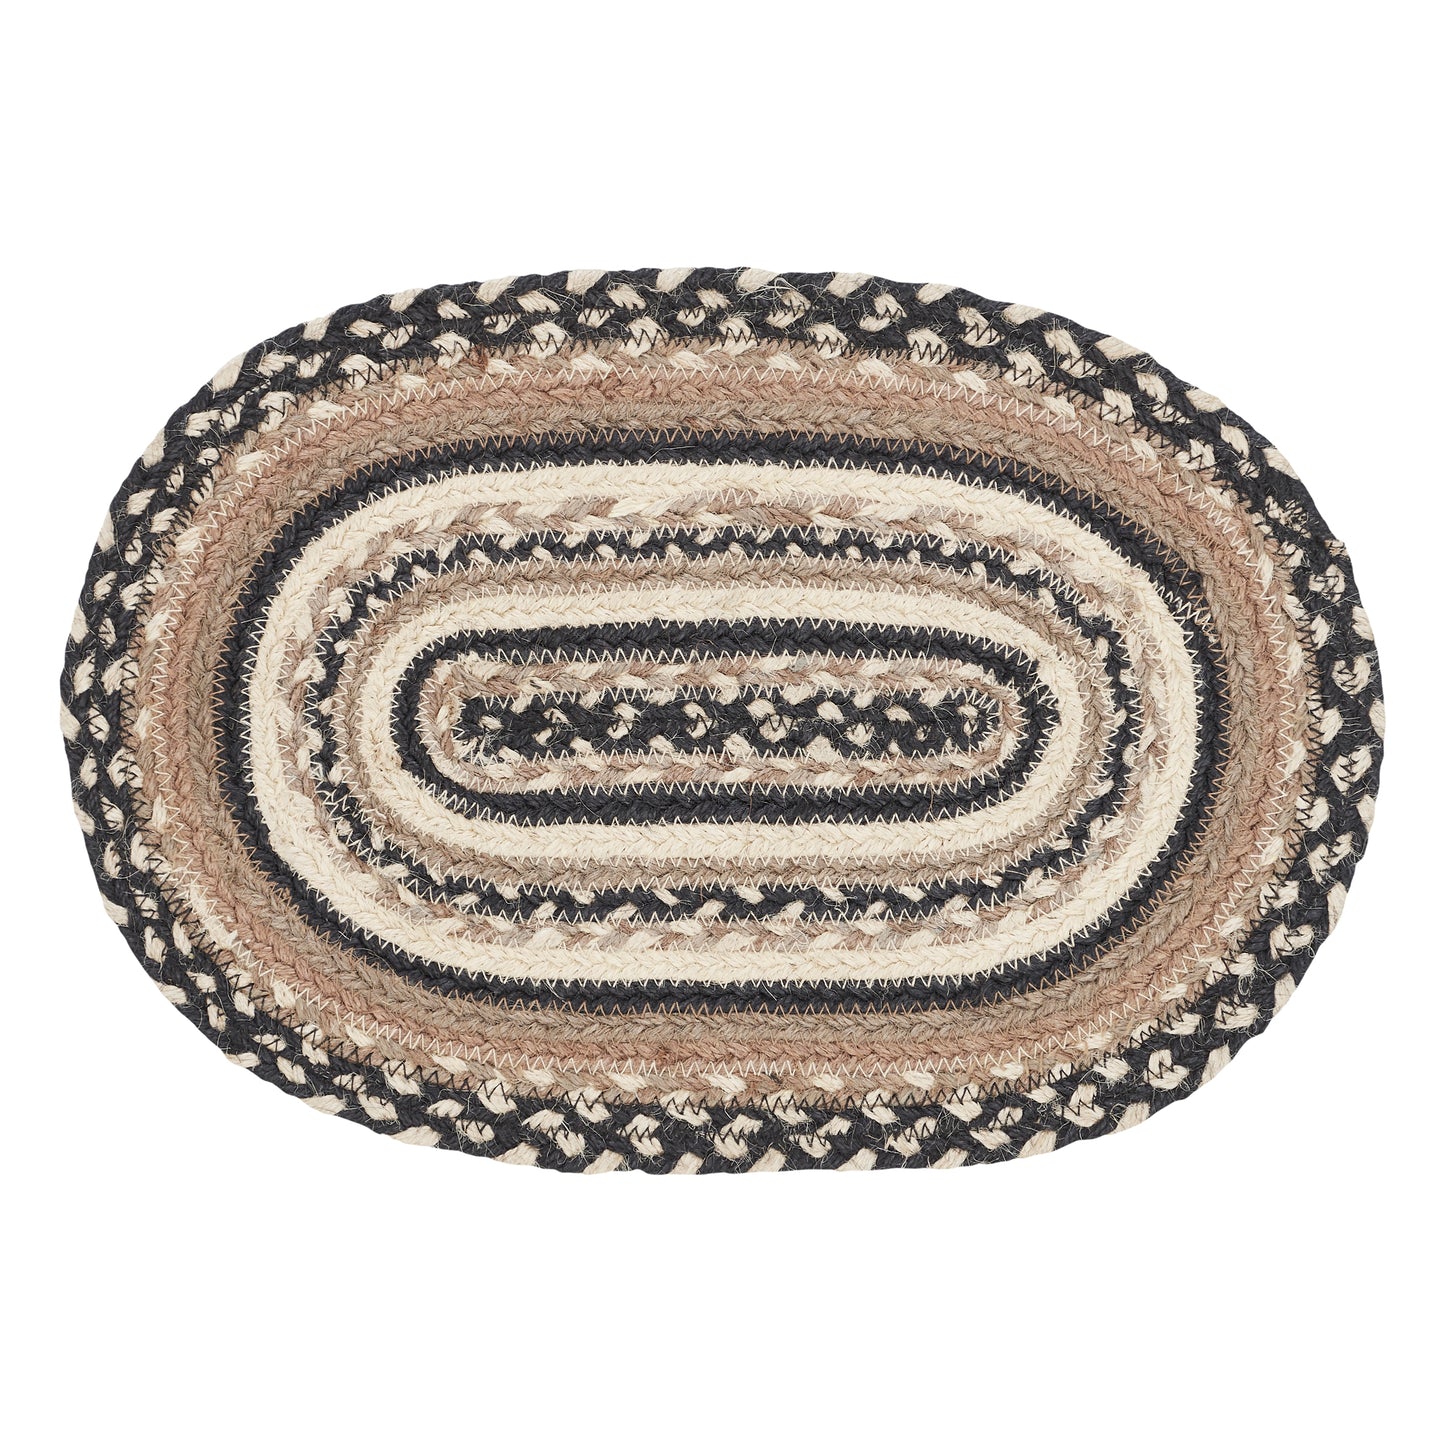 81447-Sawyer-Mill-Charcoal-Creme-Jute-Oval-Placemat-10x15-image-4